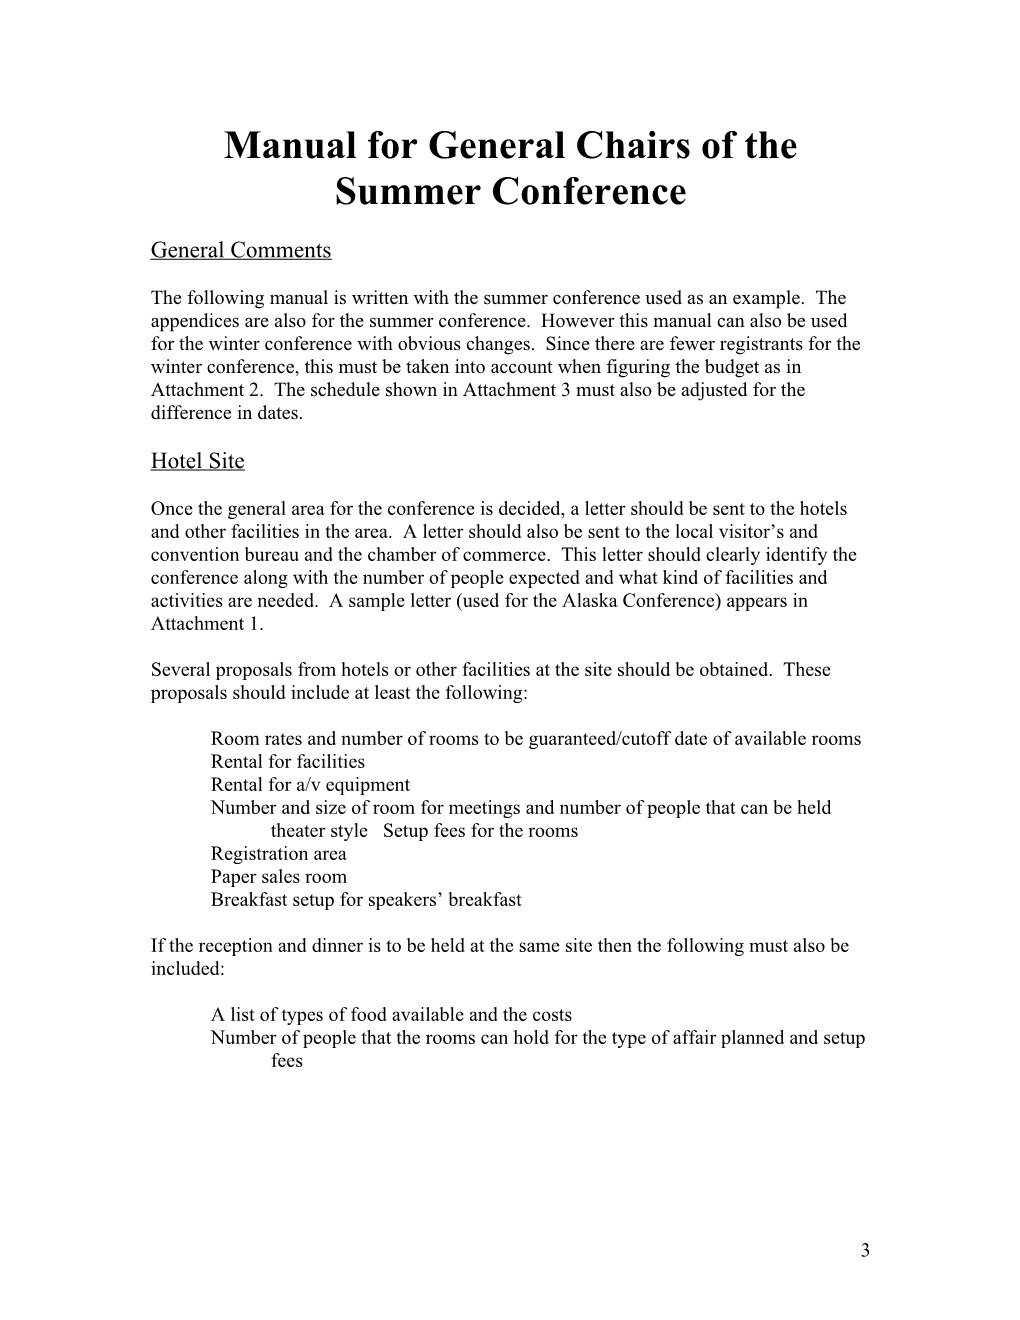 Manual for General Chairs of the Summer Conference